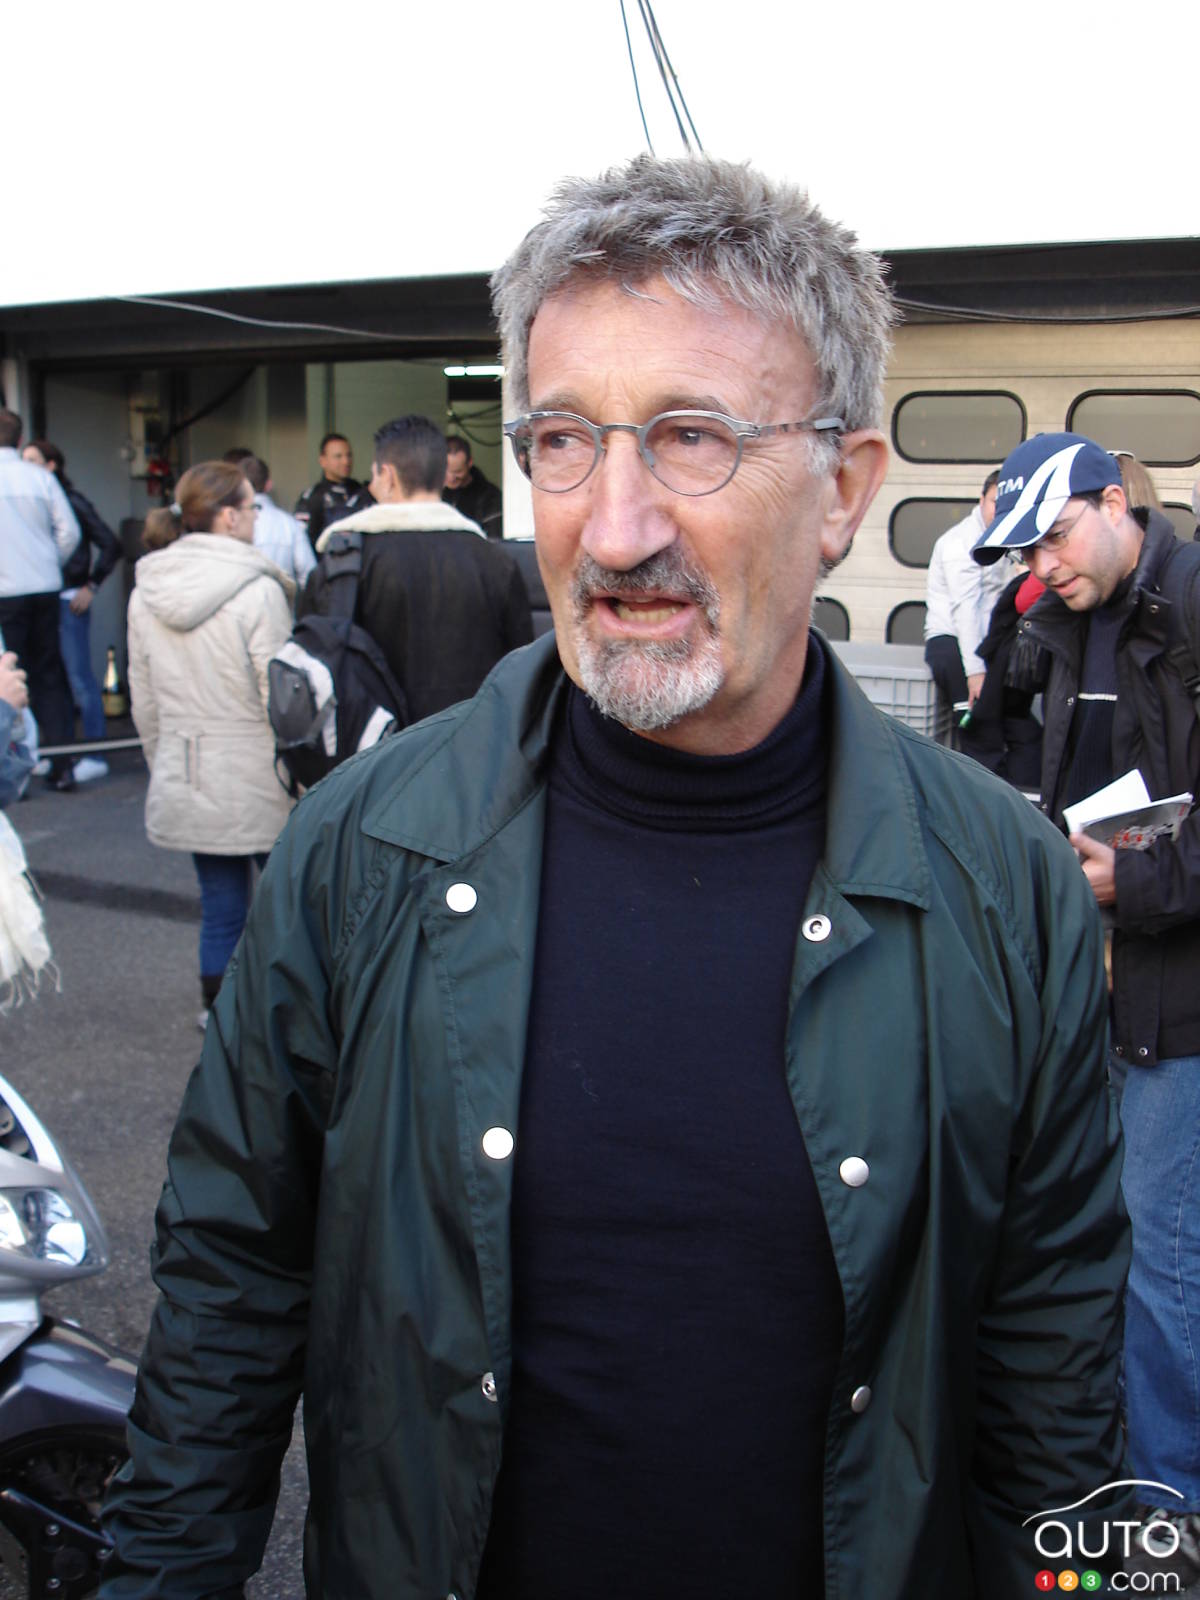 Former boss Eddie Jordan to be named co-host of Top Gear | Car | Auto123